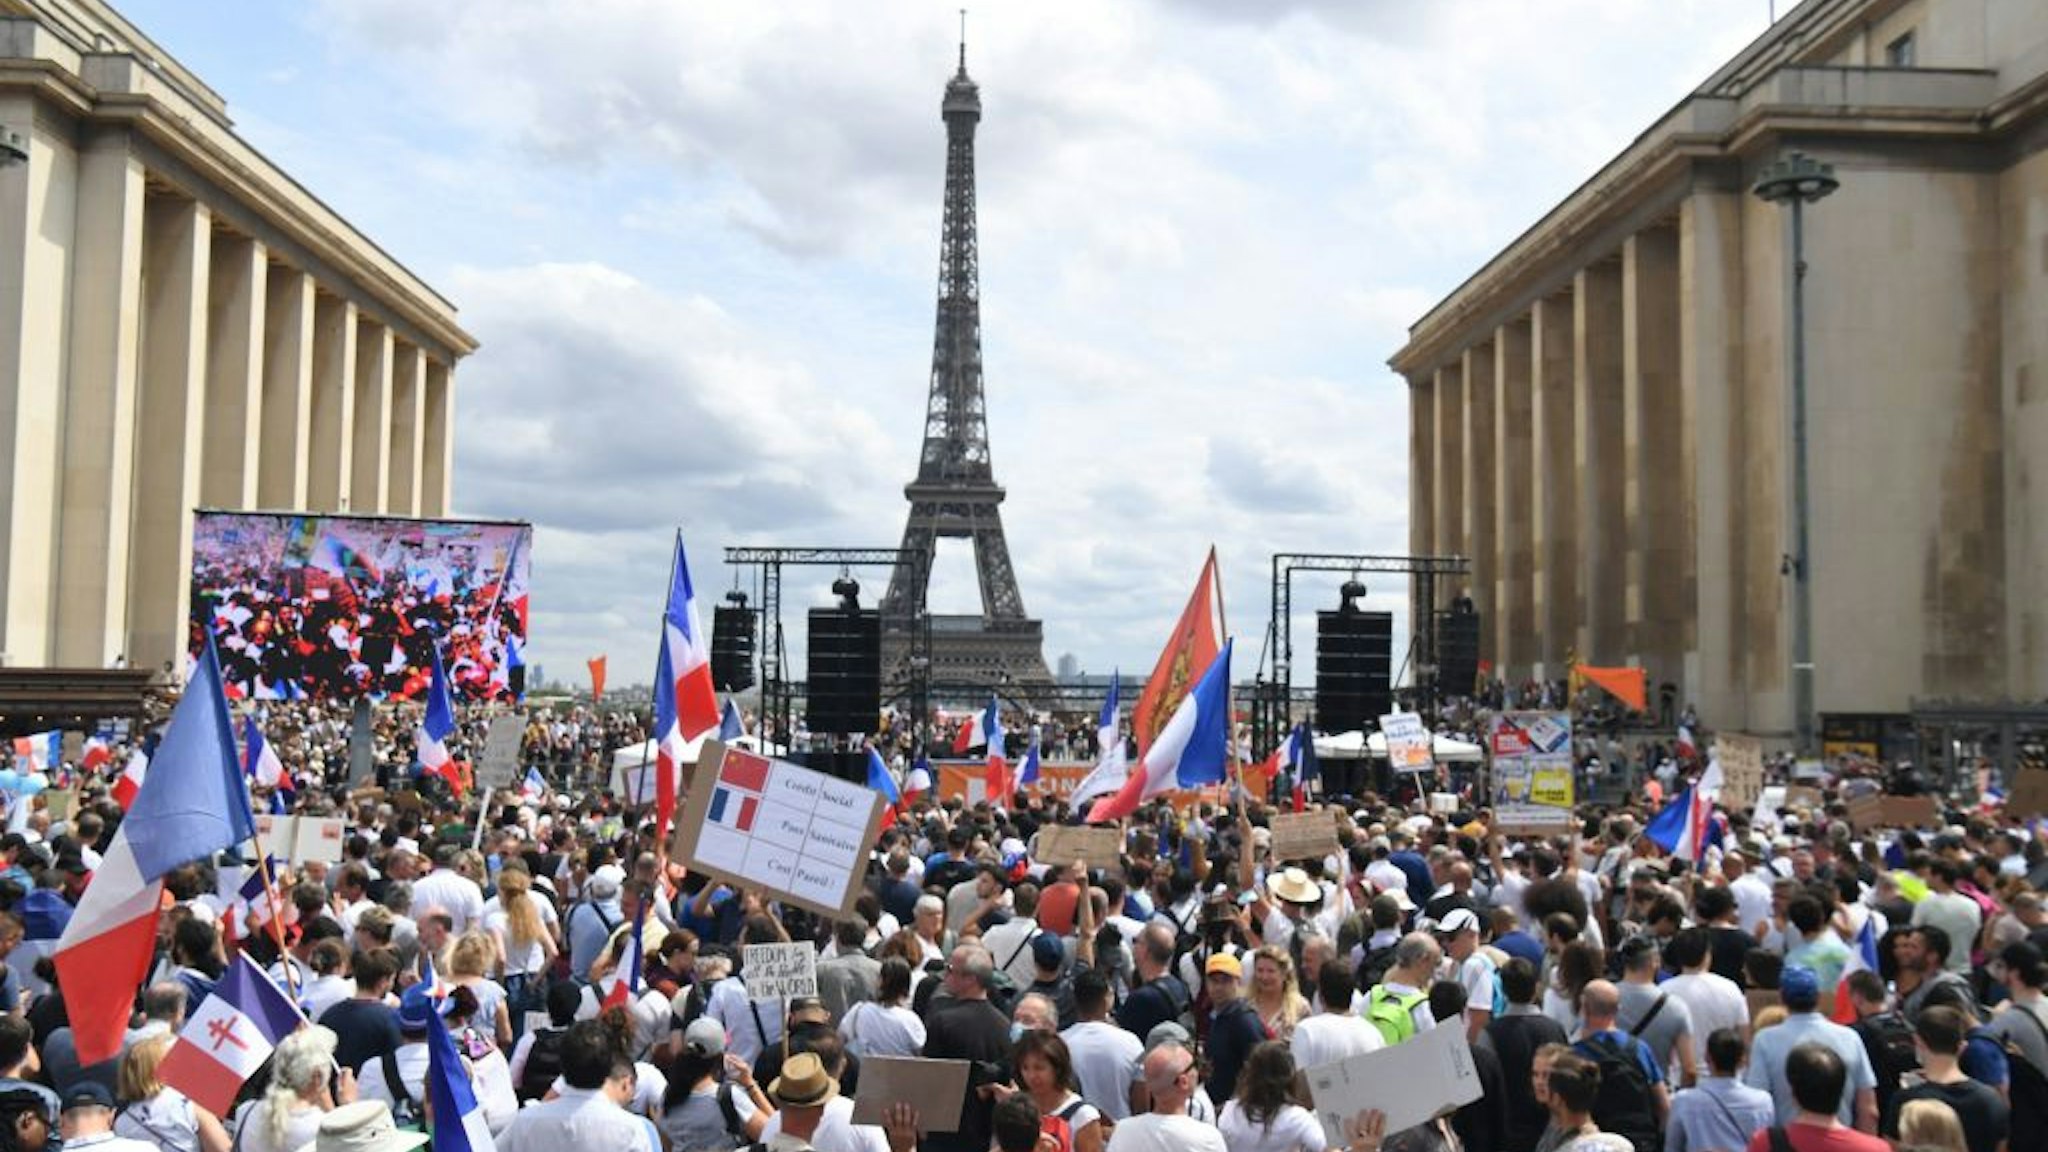 TOPSHOT - Protesters take part in a protest against the compulsory vaccination for certain workers and the mandatory use of the health pass called by the French government, on the "Droits de l'homme" (human rights) esplanade at the Trocadero Square, in front of the Eiffel Tower in Paris on July 24, 2021. - Since July 21, people wanting to go to in most public spaces in France have to show a proof of Covid-19 vaccination or a negative test, as the country braces for a feared spike in cases from the highly transmissible Covid-19 Delta variant.